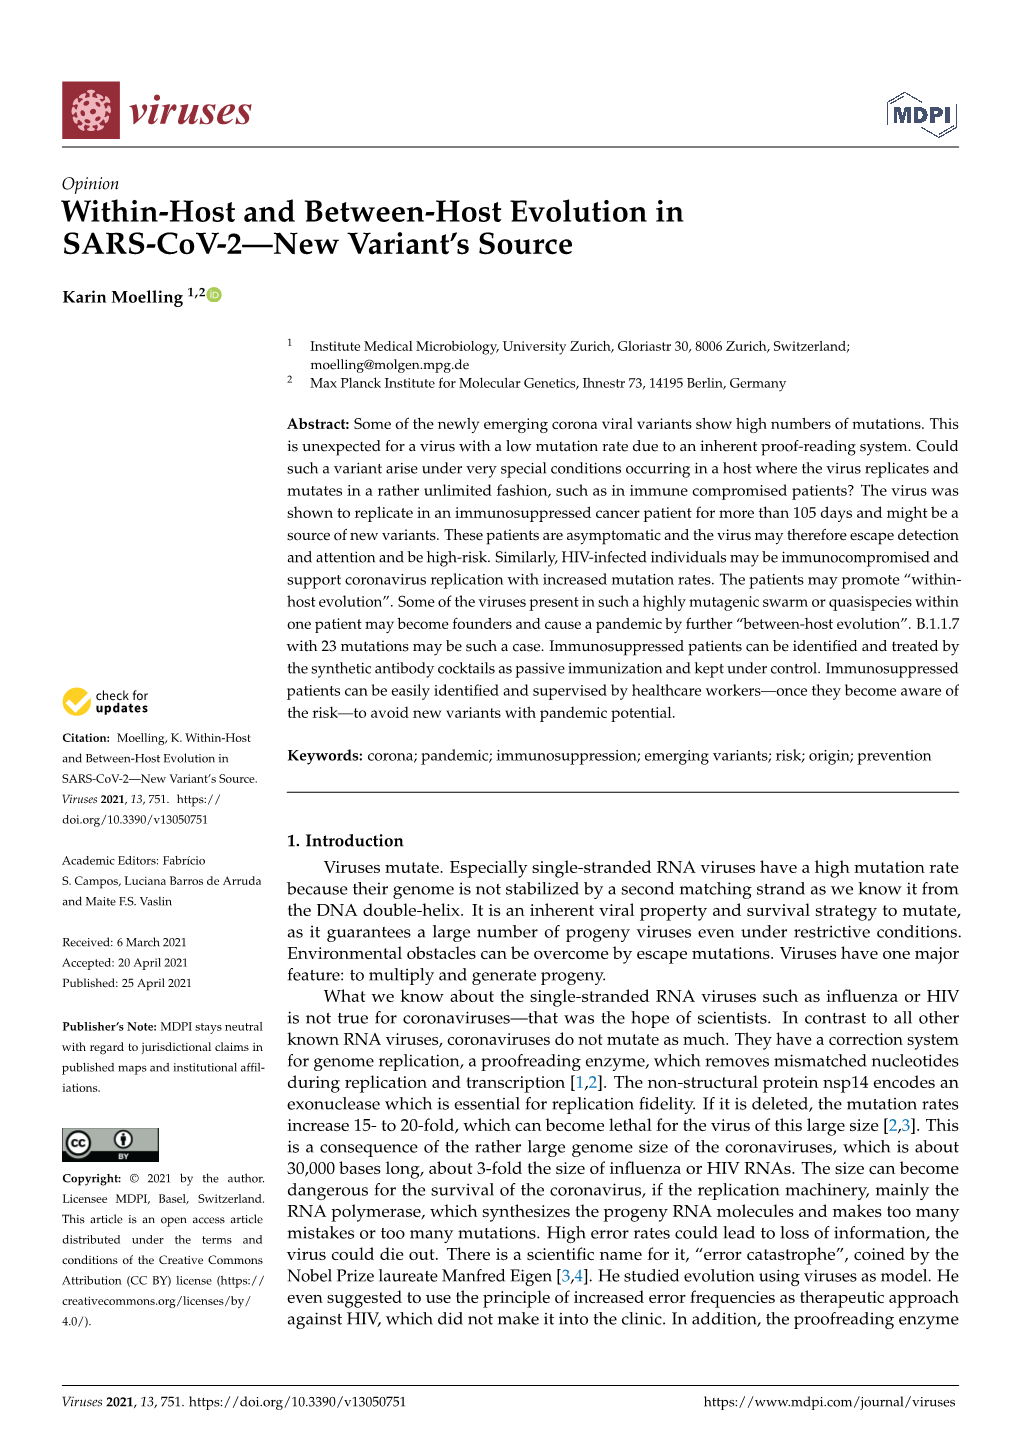 Within-Host and Between-Host Evolution in SARS-Cov-2—New Variant’S Source